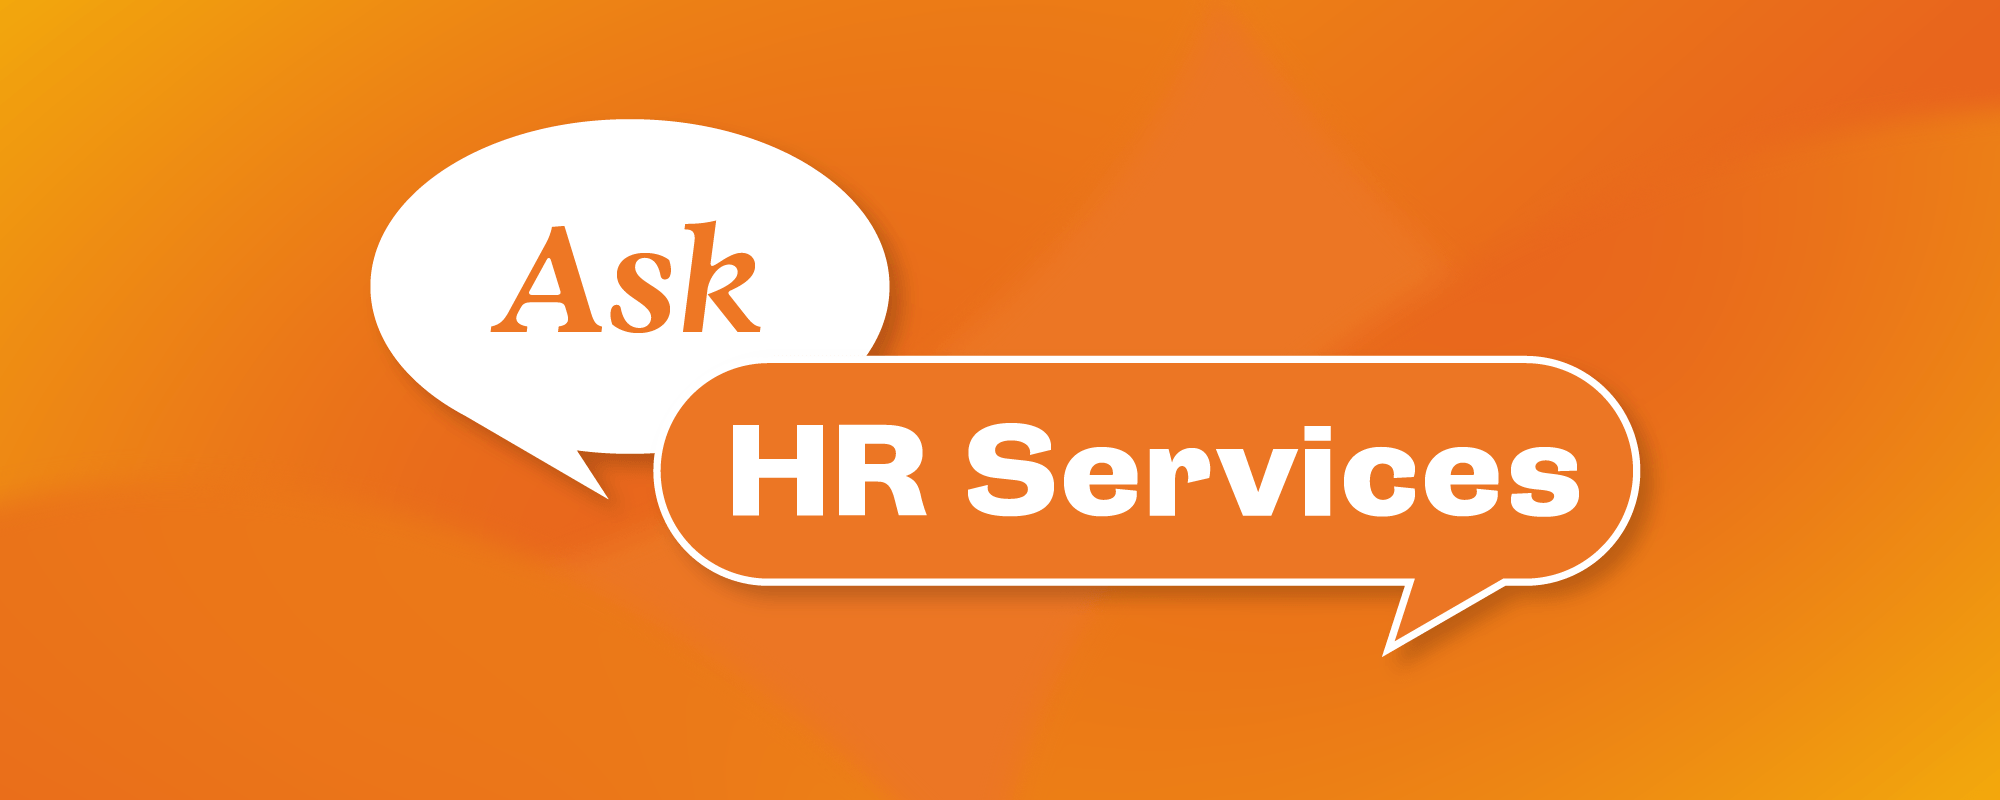 Ask HR Services banner image 2000x800